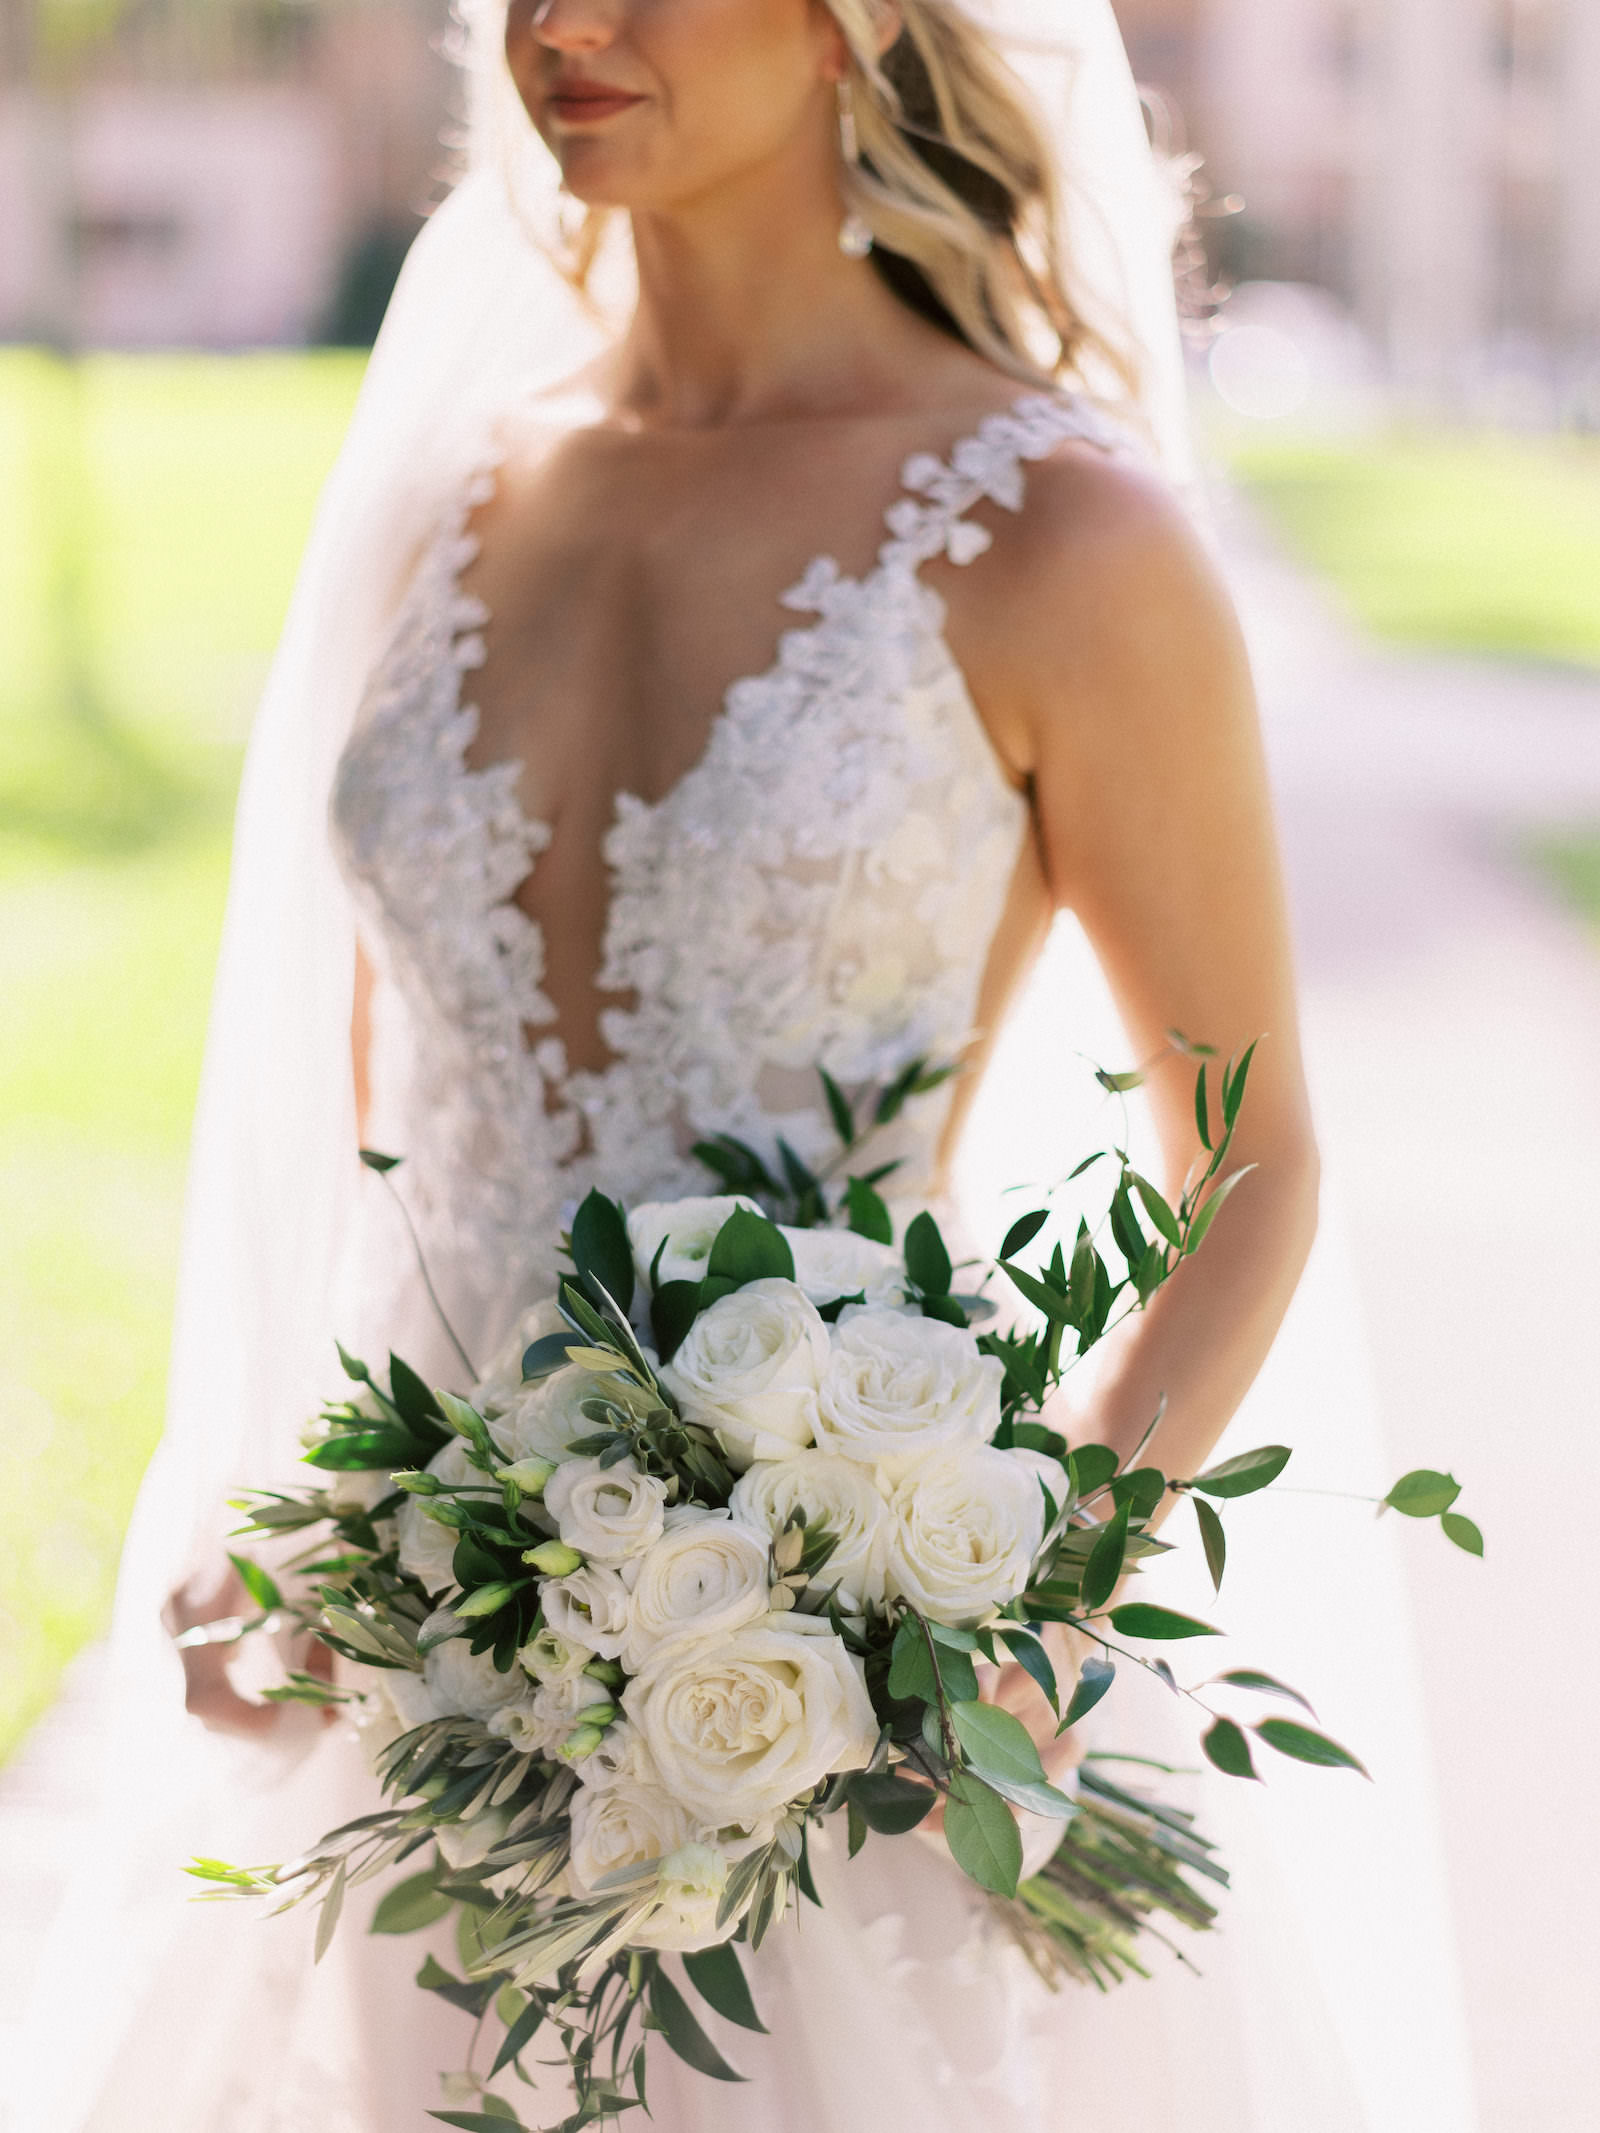 Florida Bride Holding Whimsical Inspired Bridal Bouquet, Ivory Florals and White Roses with